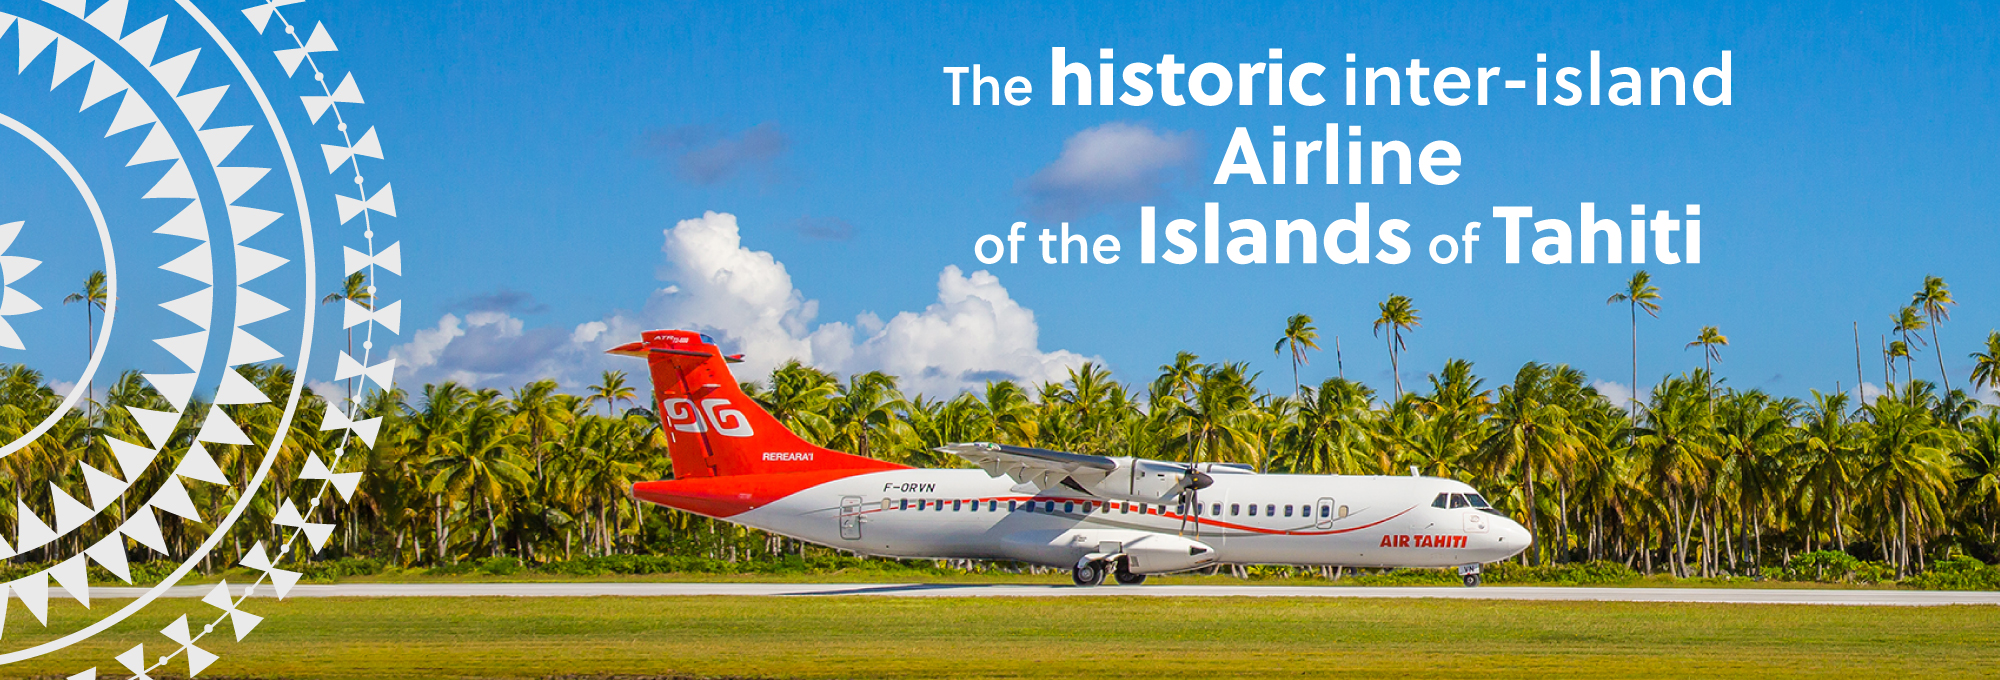 The historic inter-island Airline of the islands of Tahiti